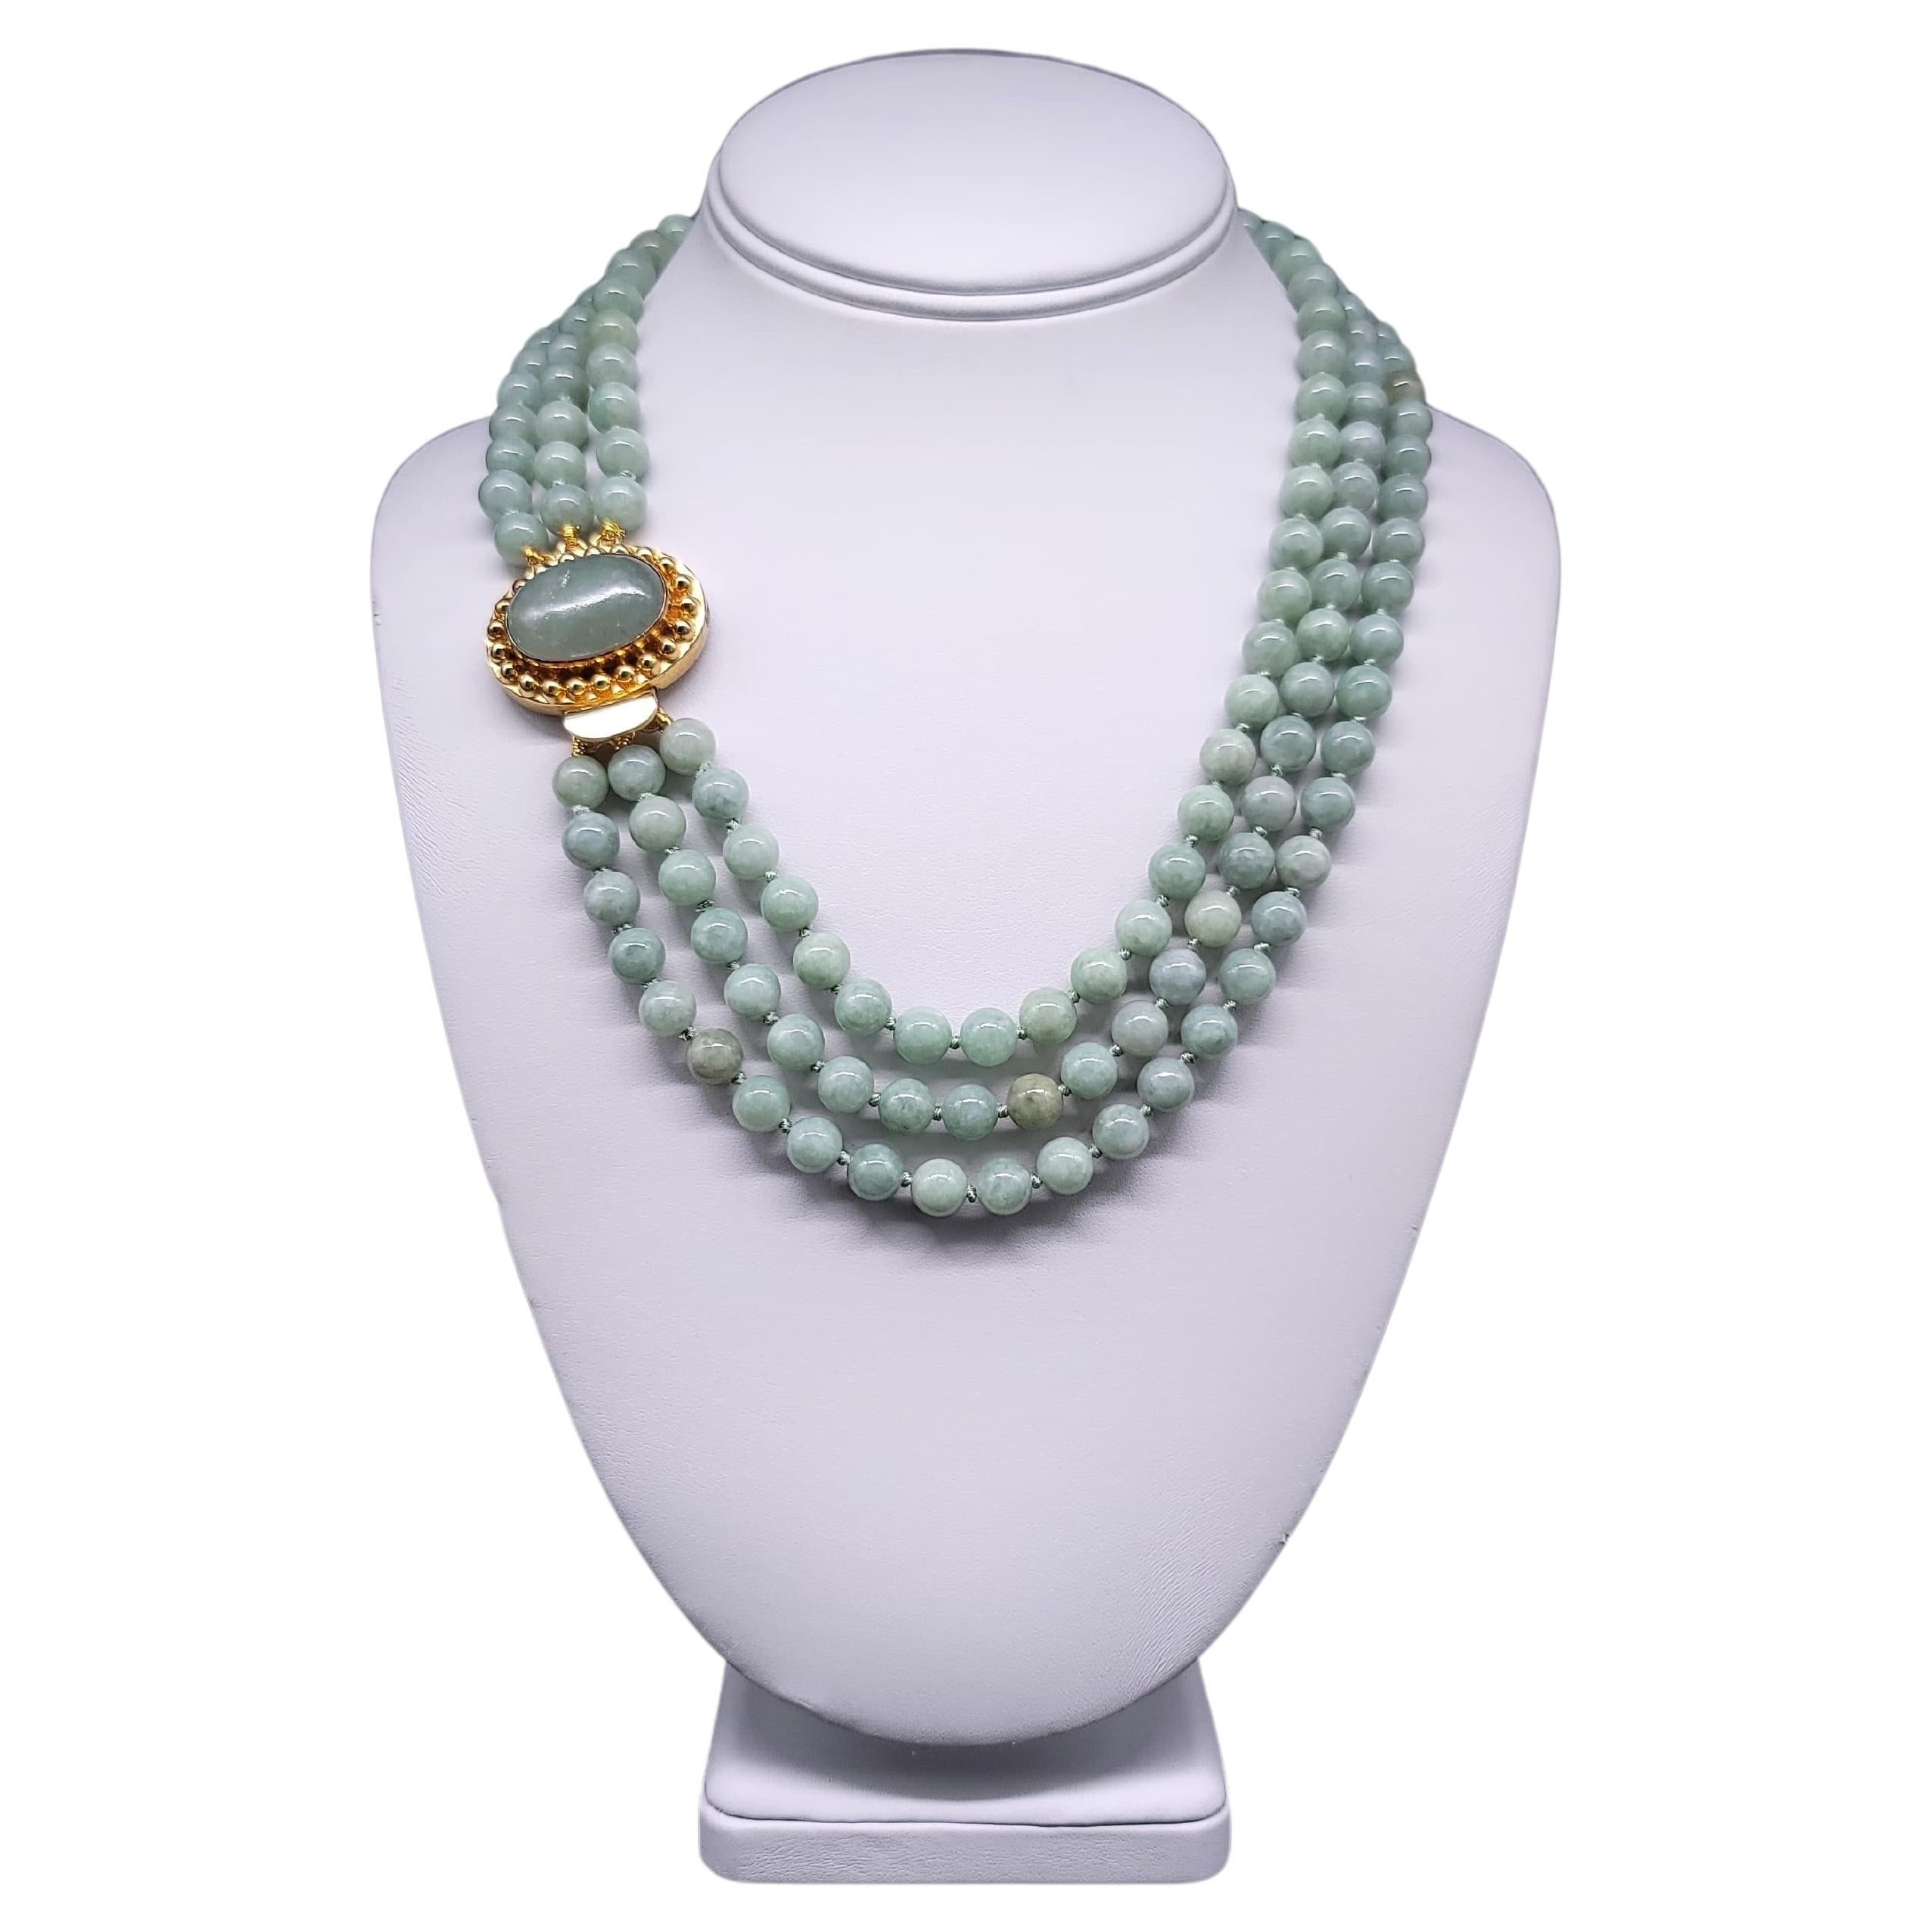 chanel-metal-glass-pearl-necklace - Bal Harbour Shops